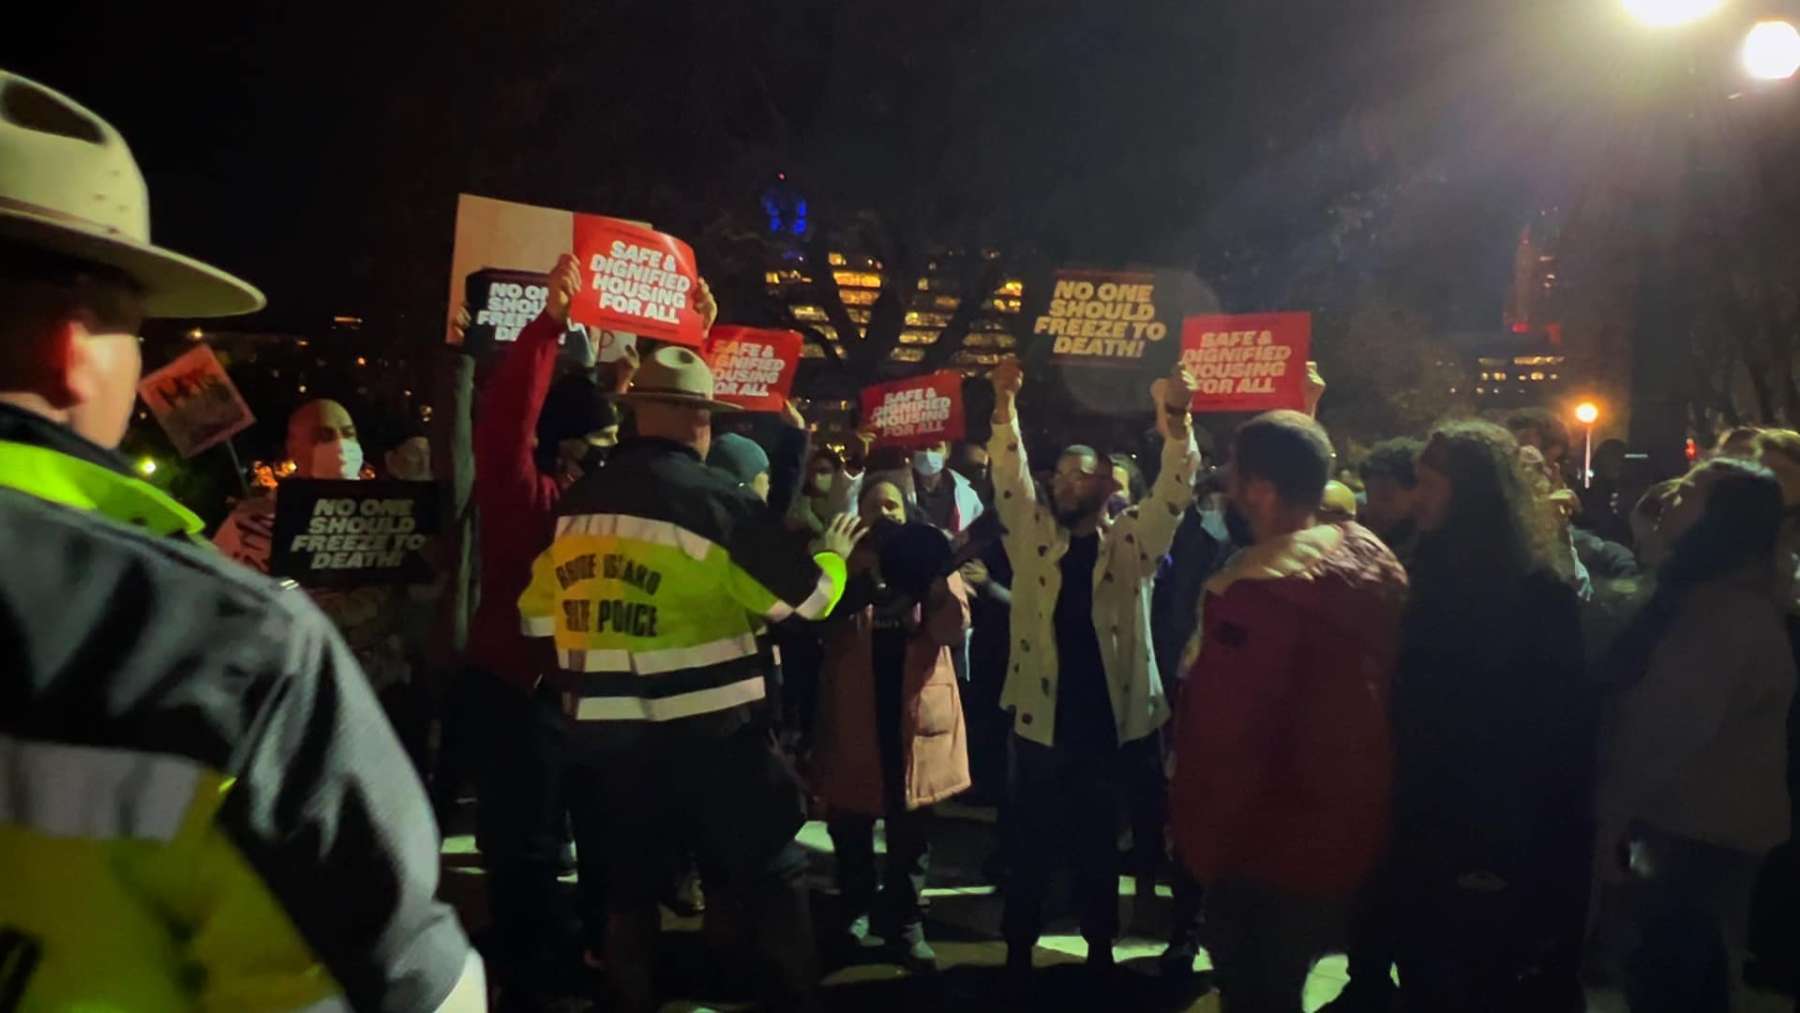 Governor McKee’s tree lighting disrupted by protesters against homelessness